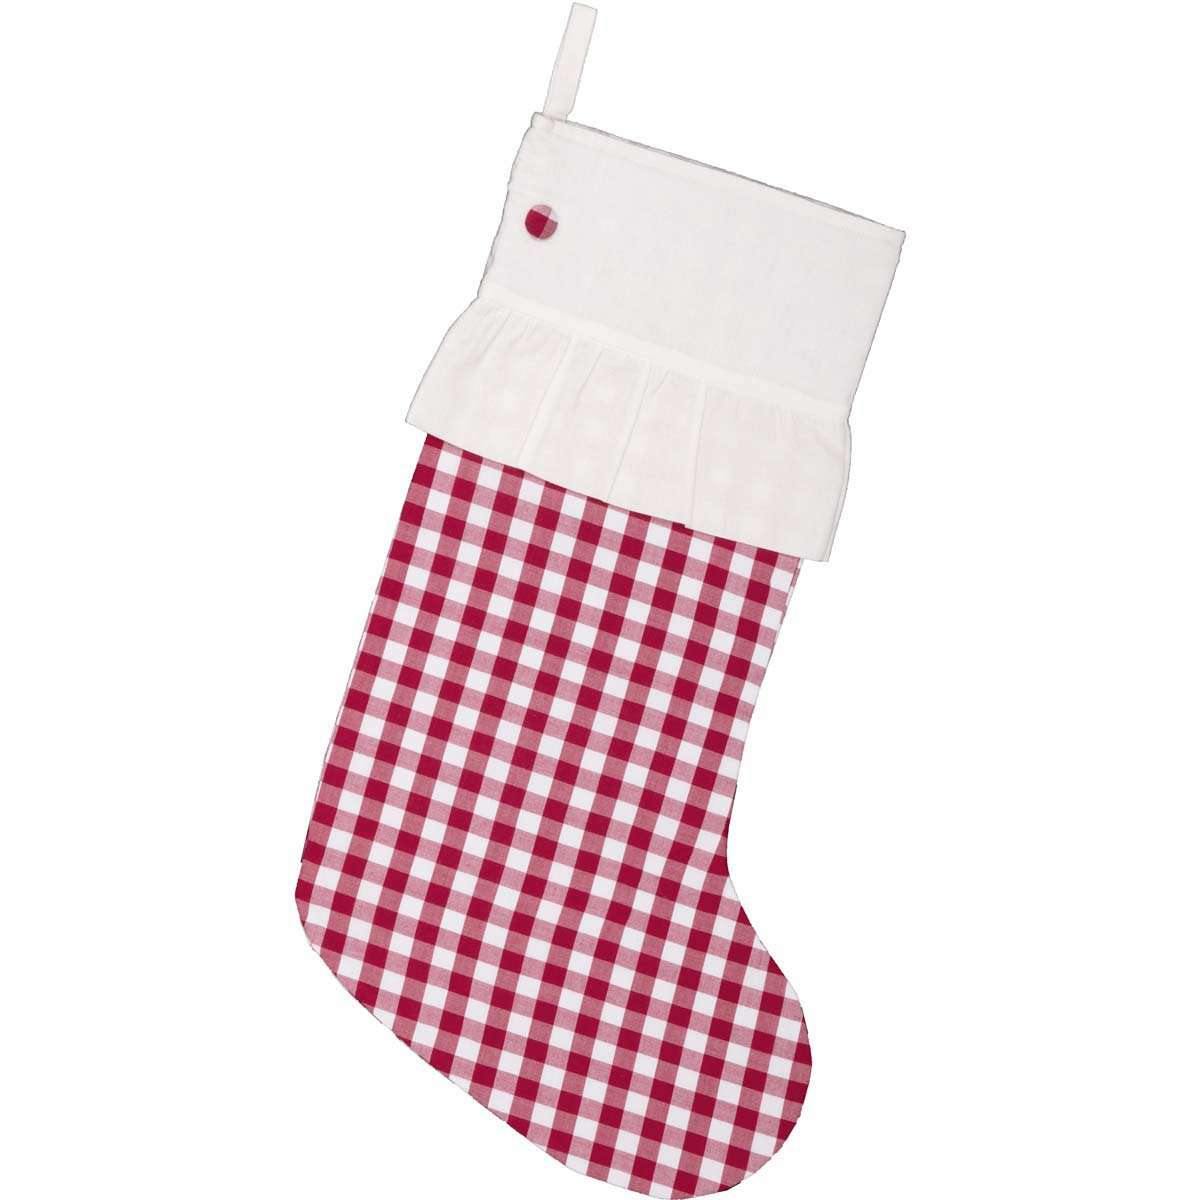 Emmie Red Check Stocking 12x20 VHC Brands - The Fox Decor